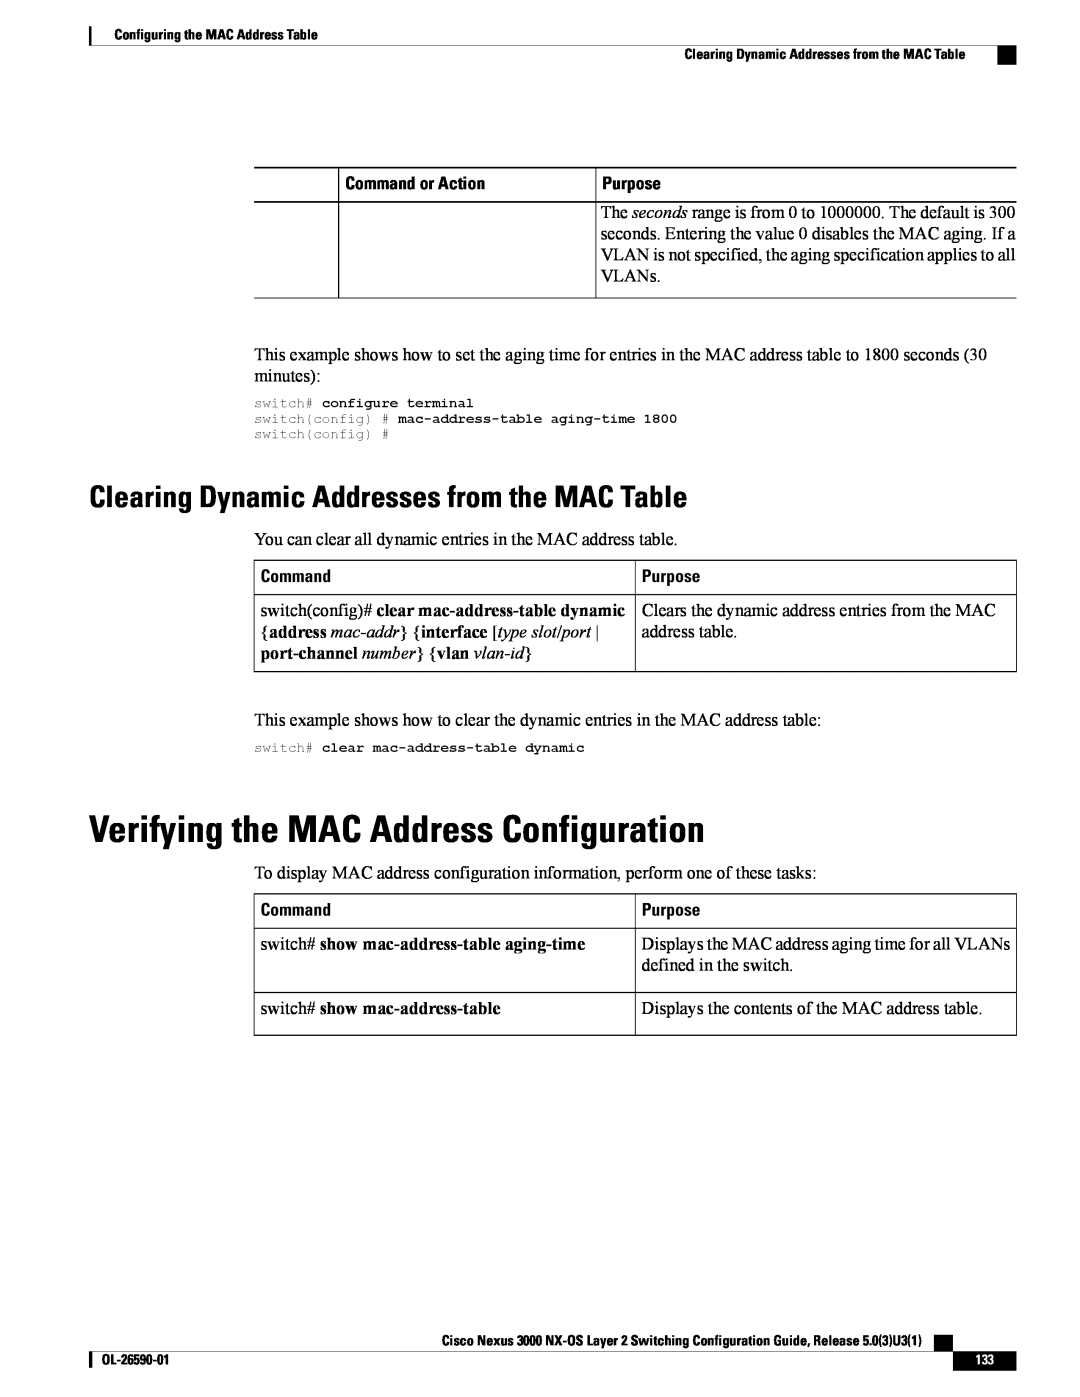 Cisco Systems N3KC3064TFAL3 manual Verifying the MAC Address Configuration, Clearing Dynamic Addresses from the MAC Table 